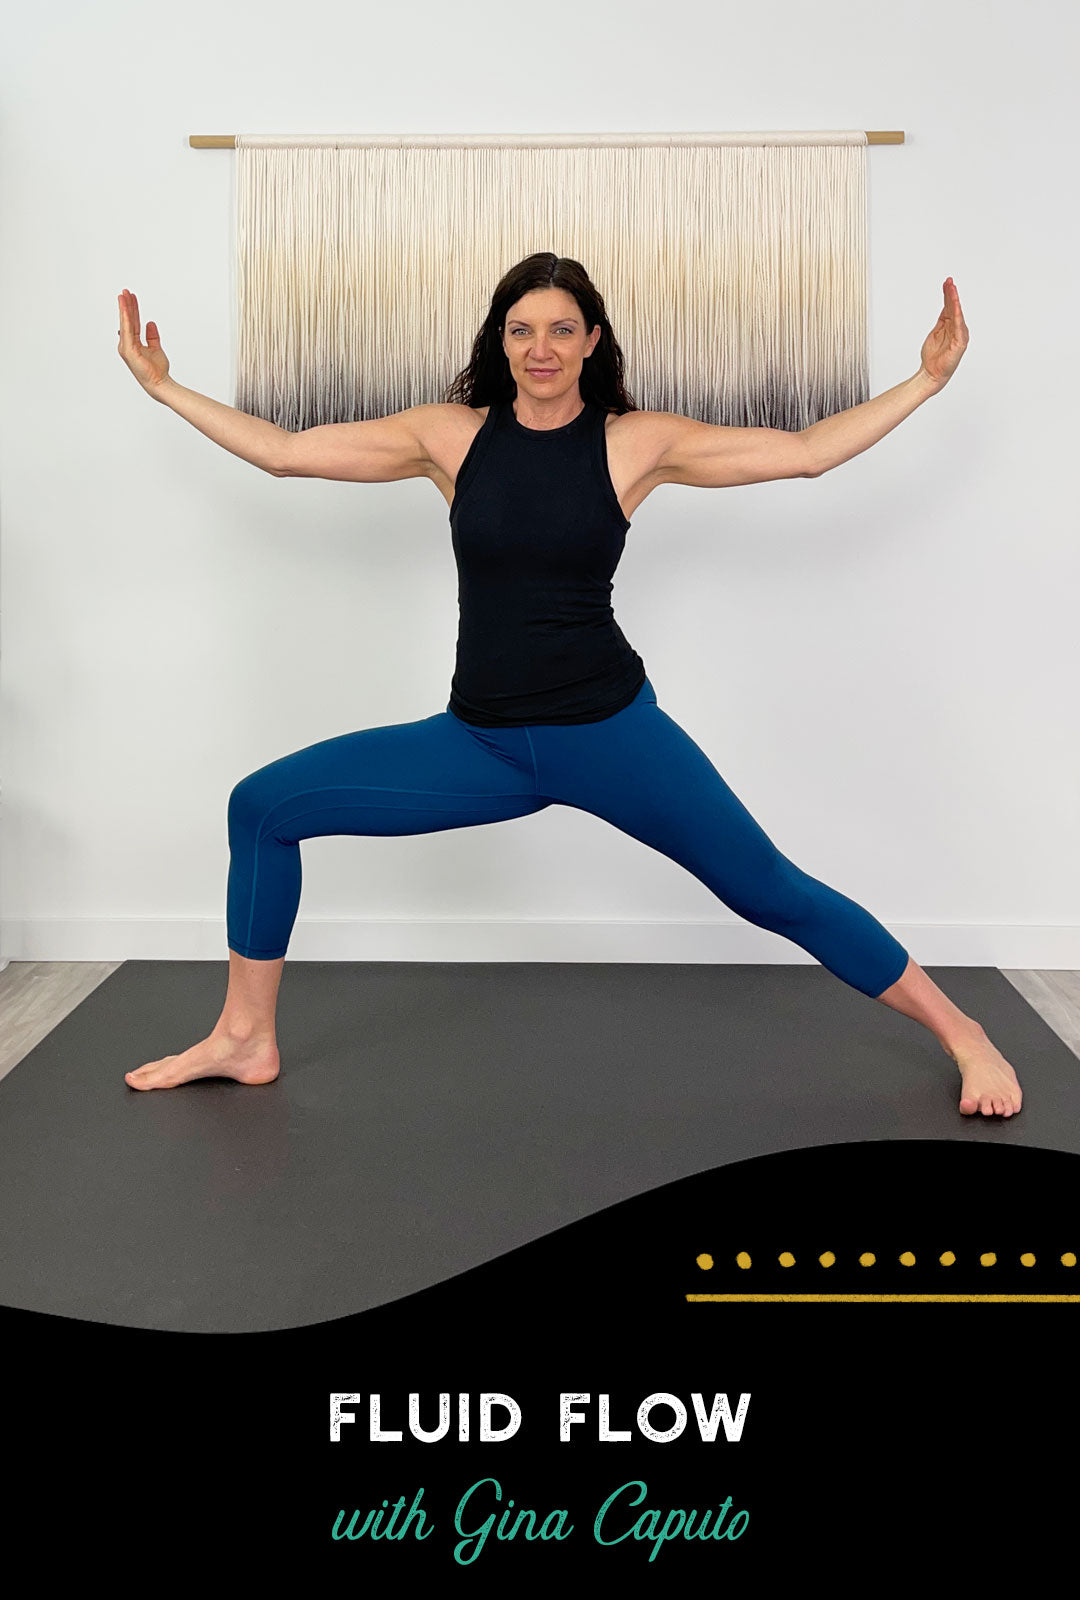 Yoga With Kassandra - First fire, then earth, now water! 7 poses and mini  circular flows to connect with the water element within you and your sacral  chakra. http://blog.yogawithkassandra.com/2017/11/circular-mini-flows-for- water-element.html | Facebook